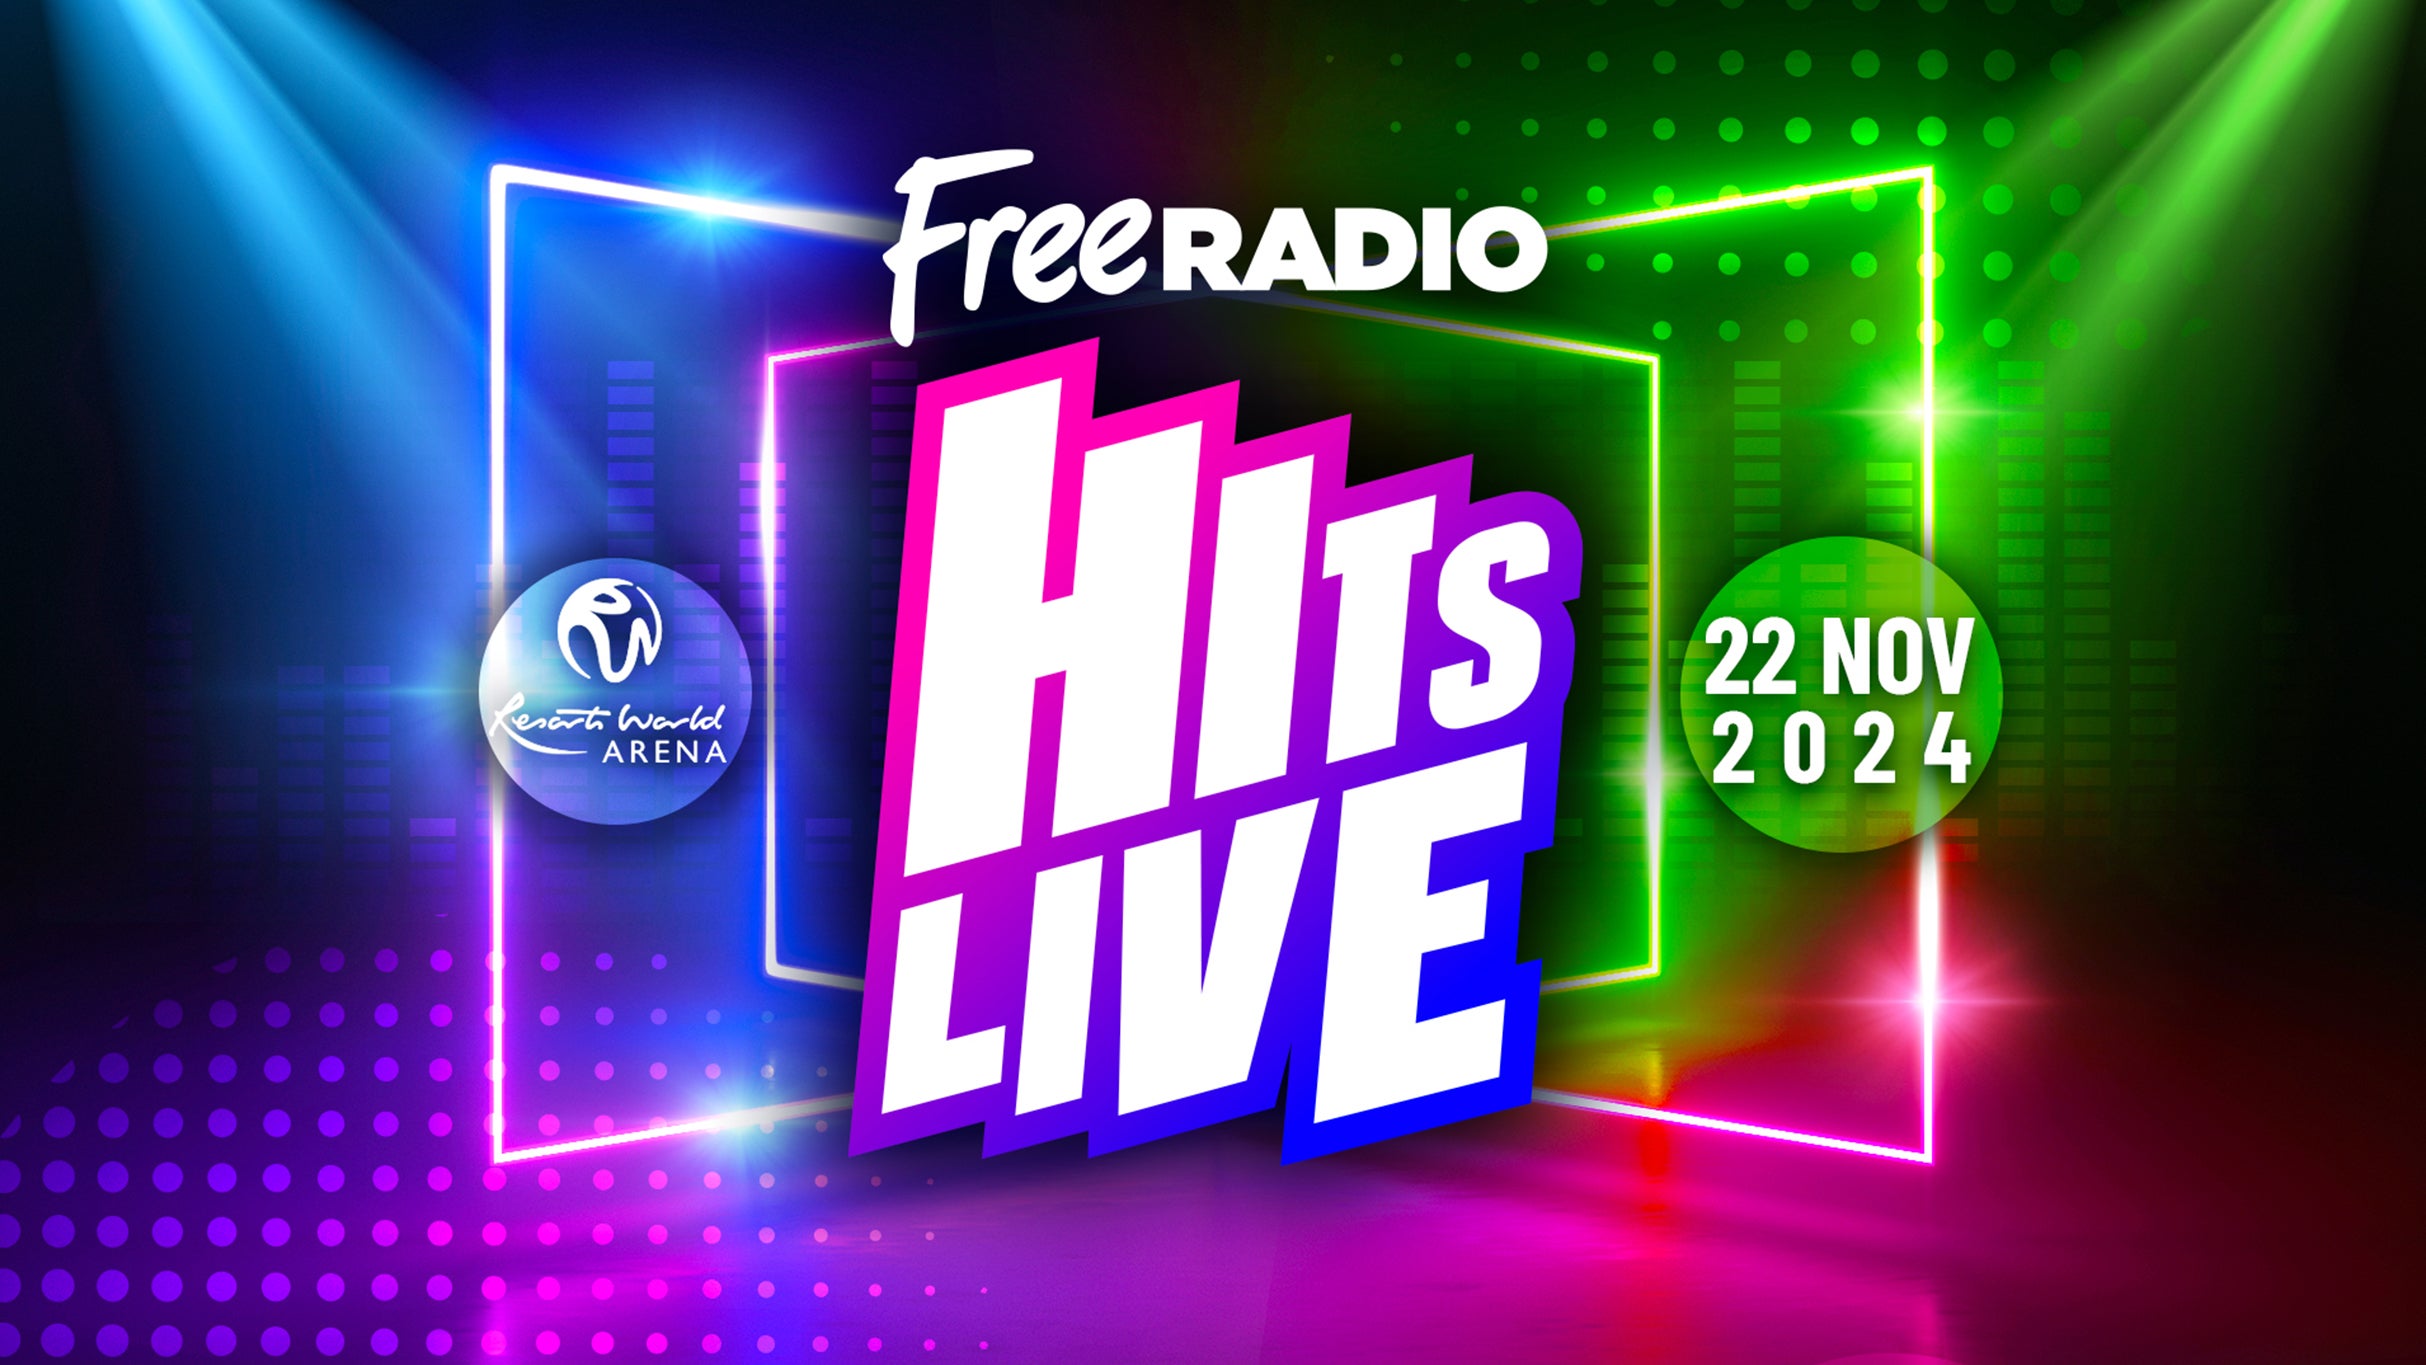 FREE RADIO HITS LIVE in Birmingham promo photo for Past Bookers presale offer code